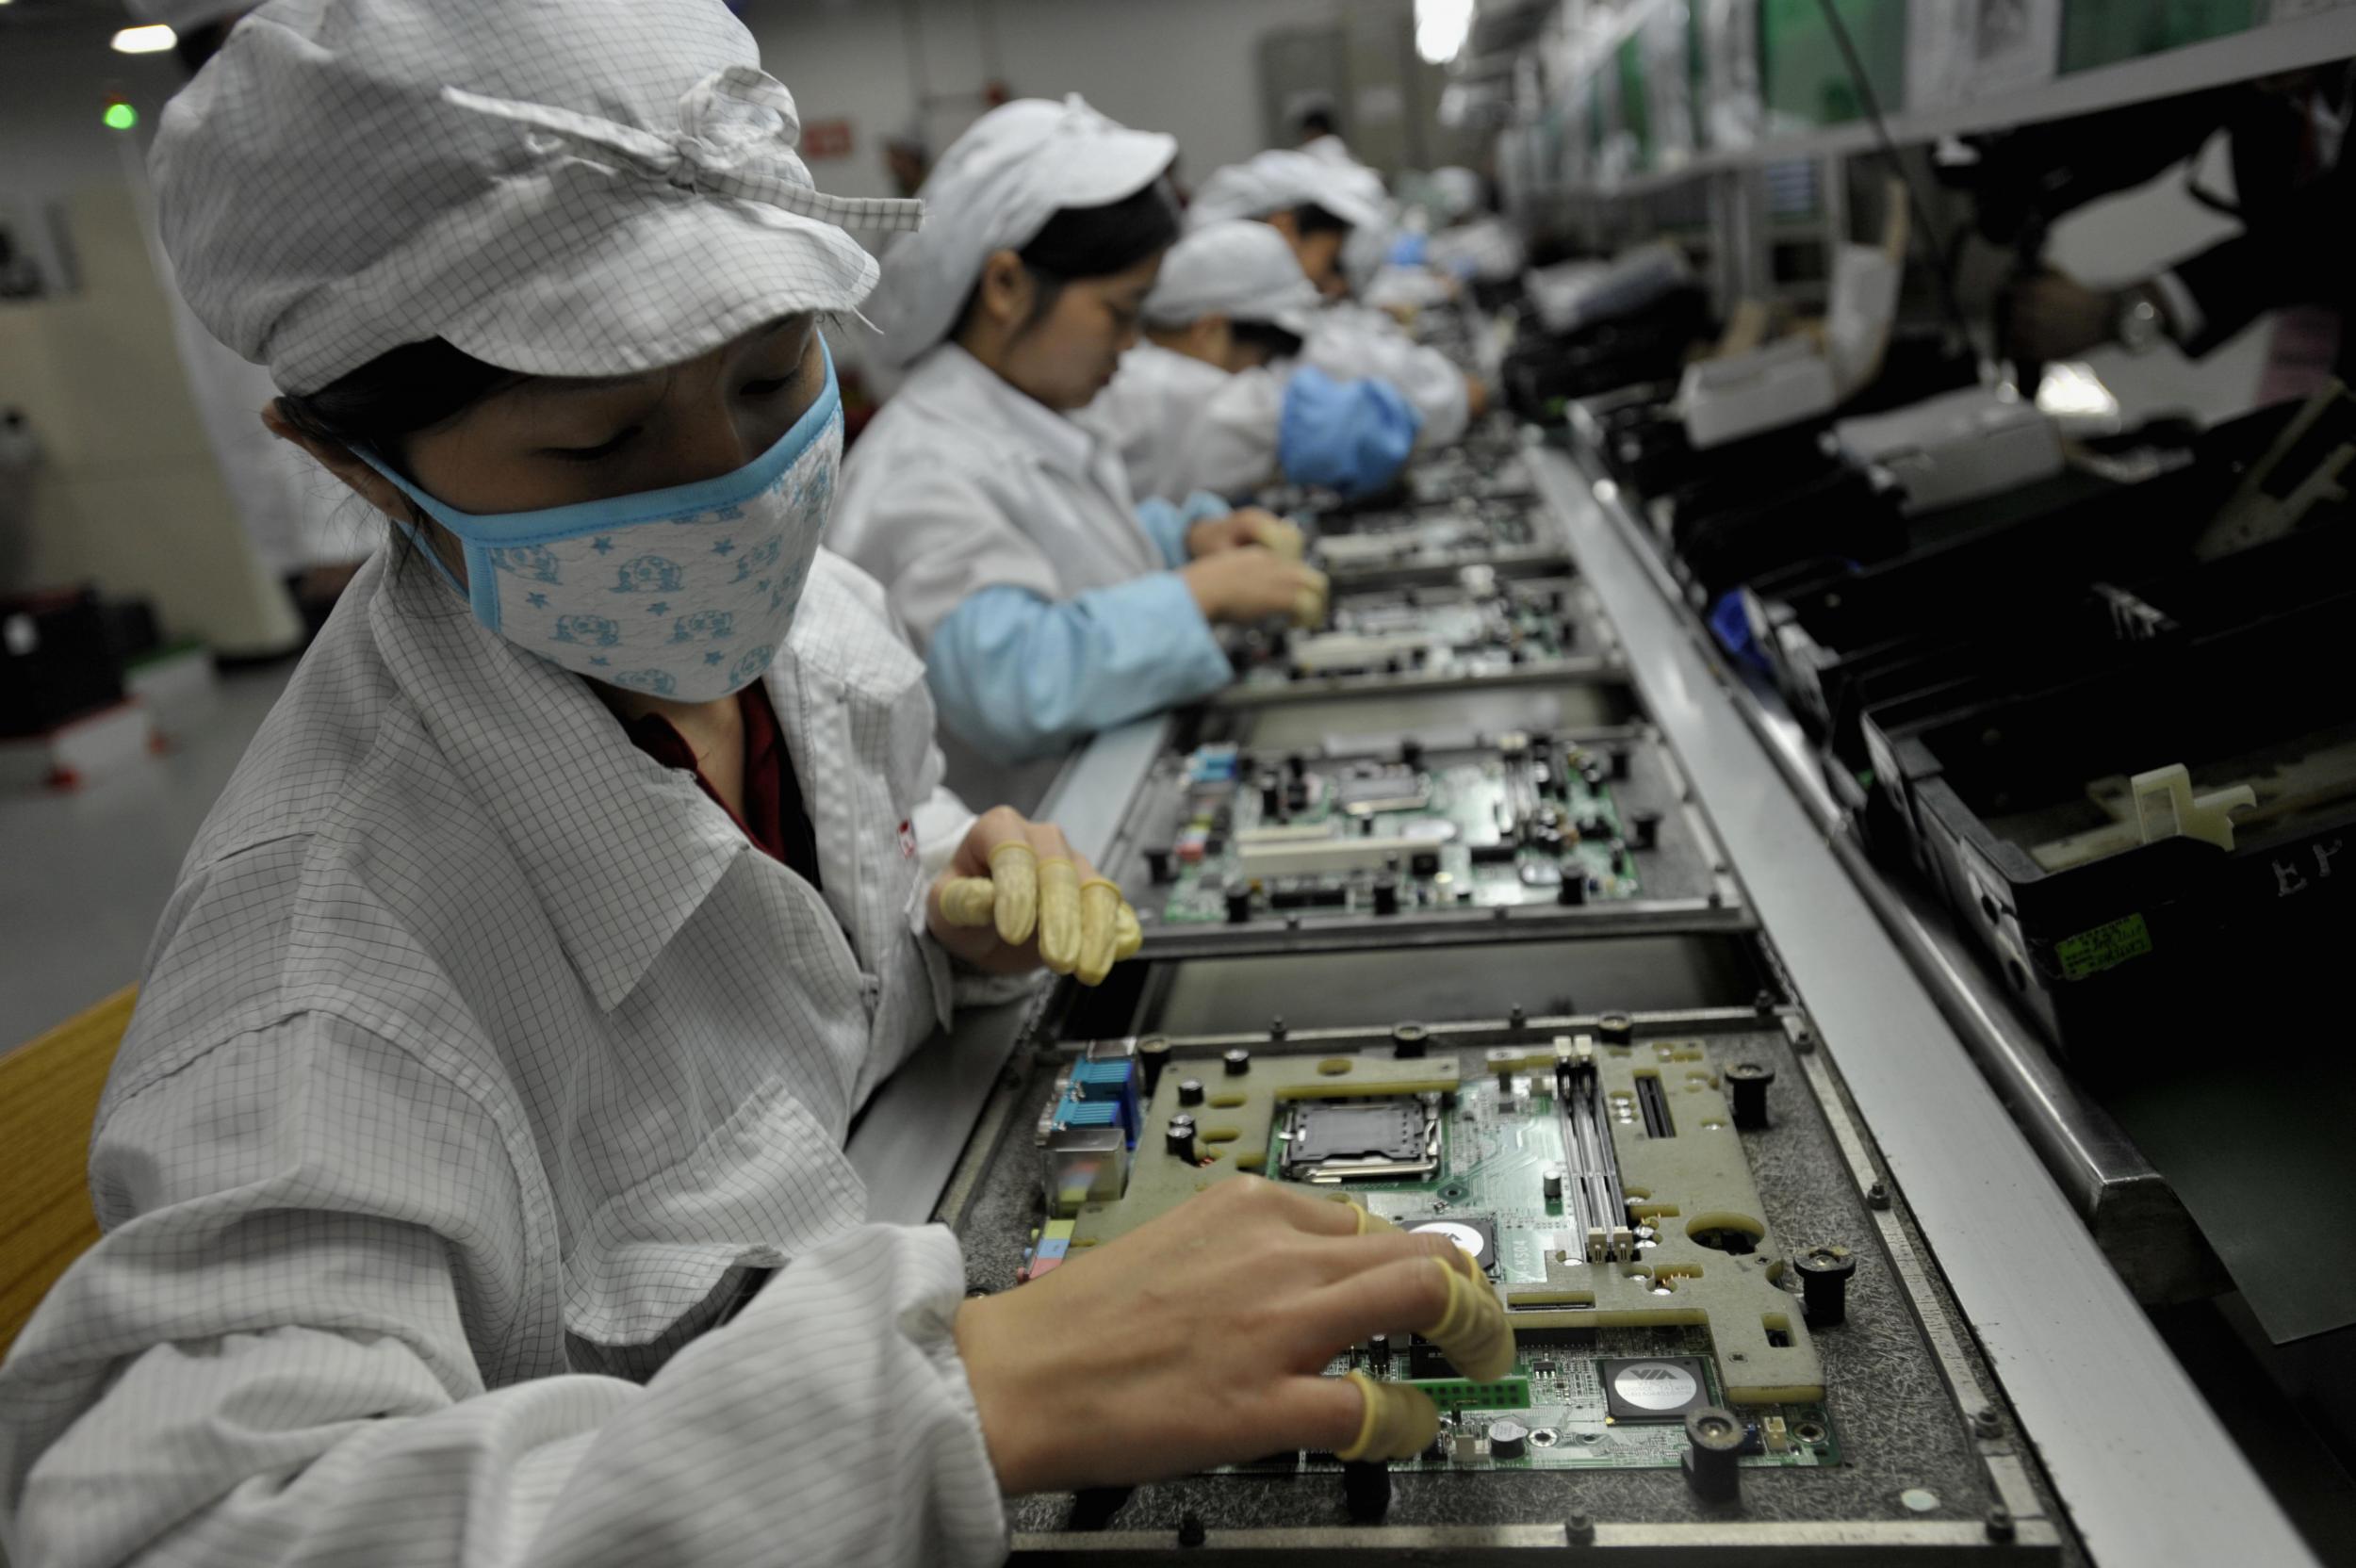 Workers assemble components at the Foxconn factory in Shenzen, China